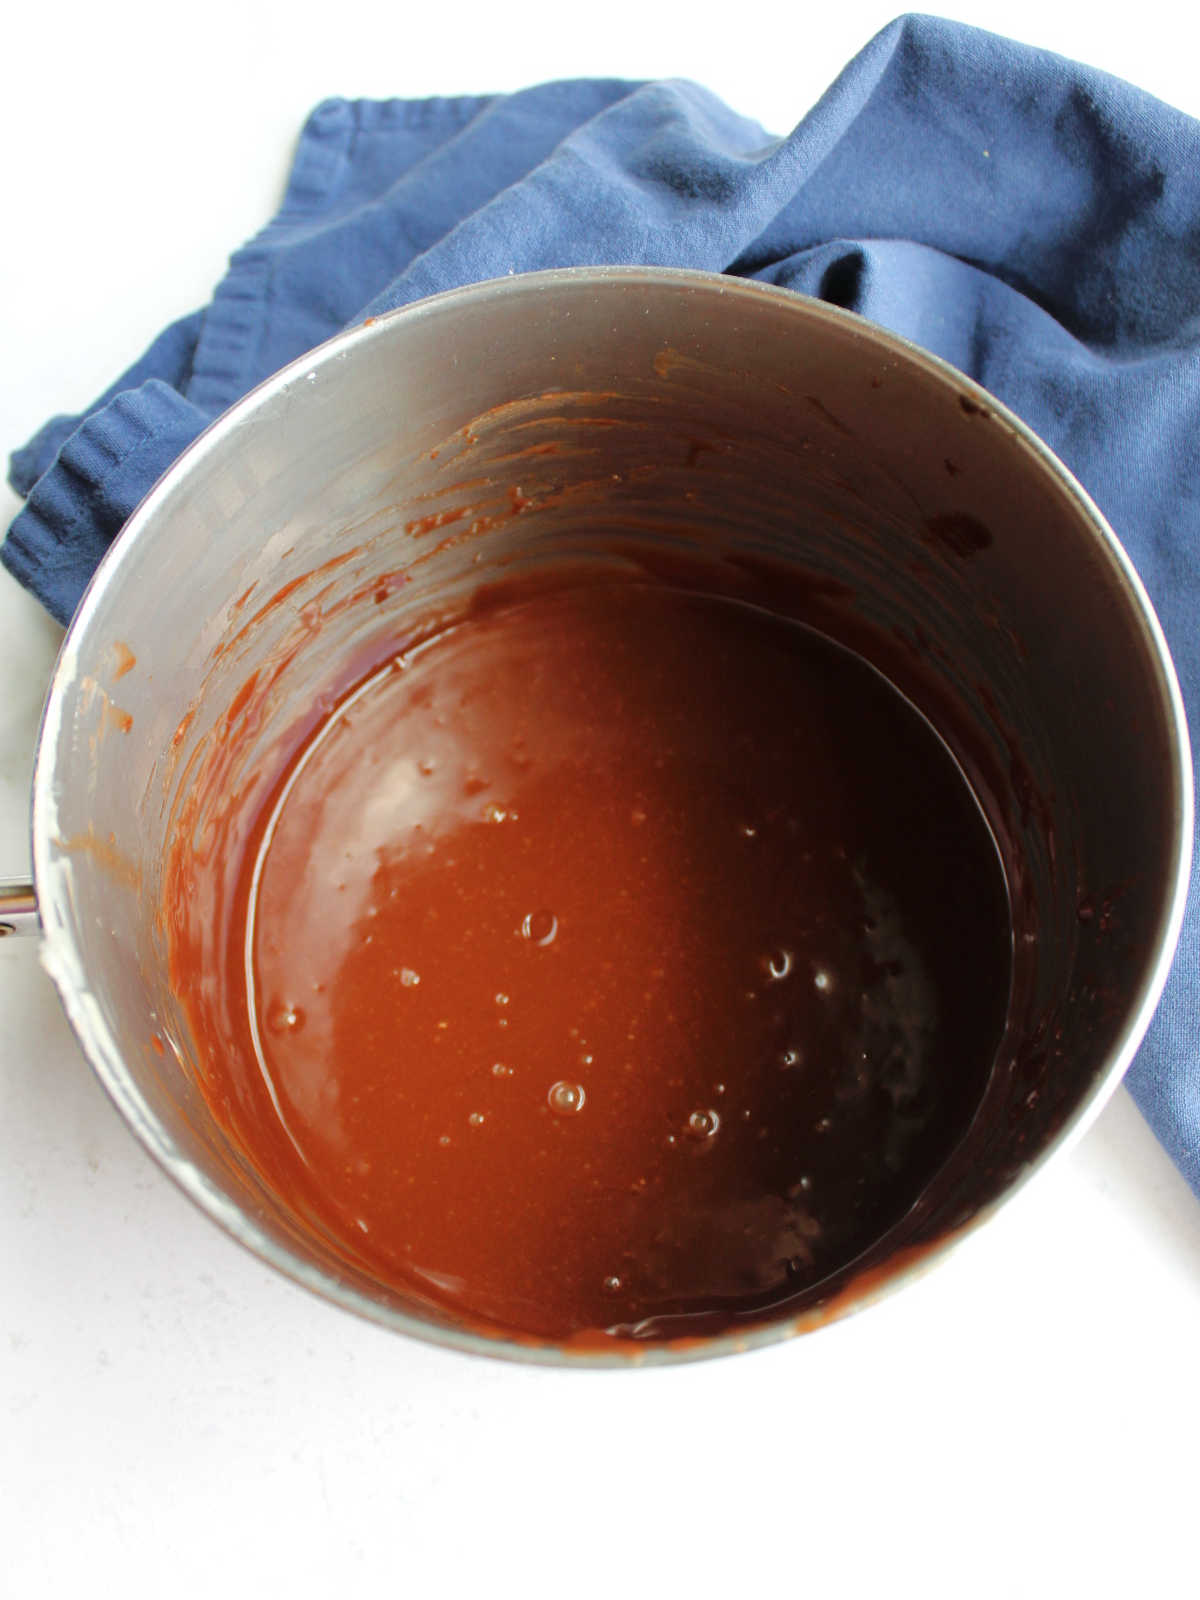 Chocolate icing in saucepan, ready to be poured over cake.